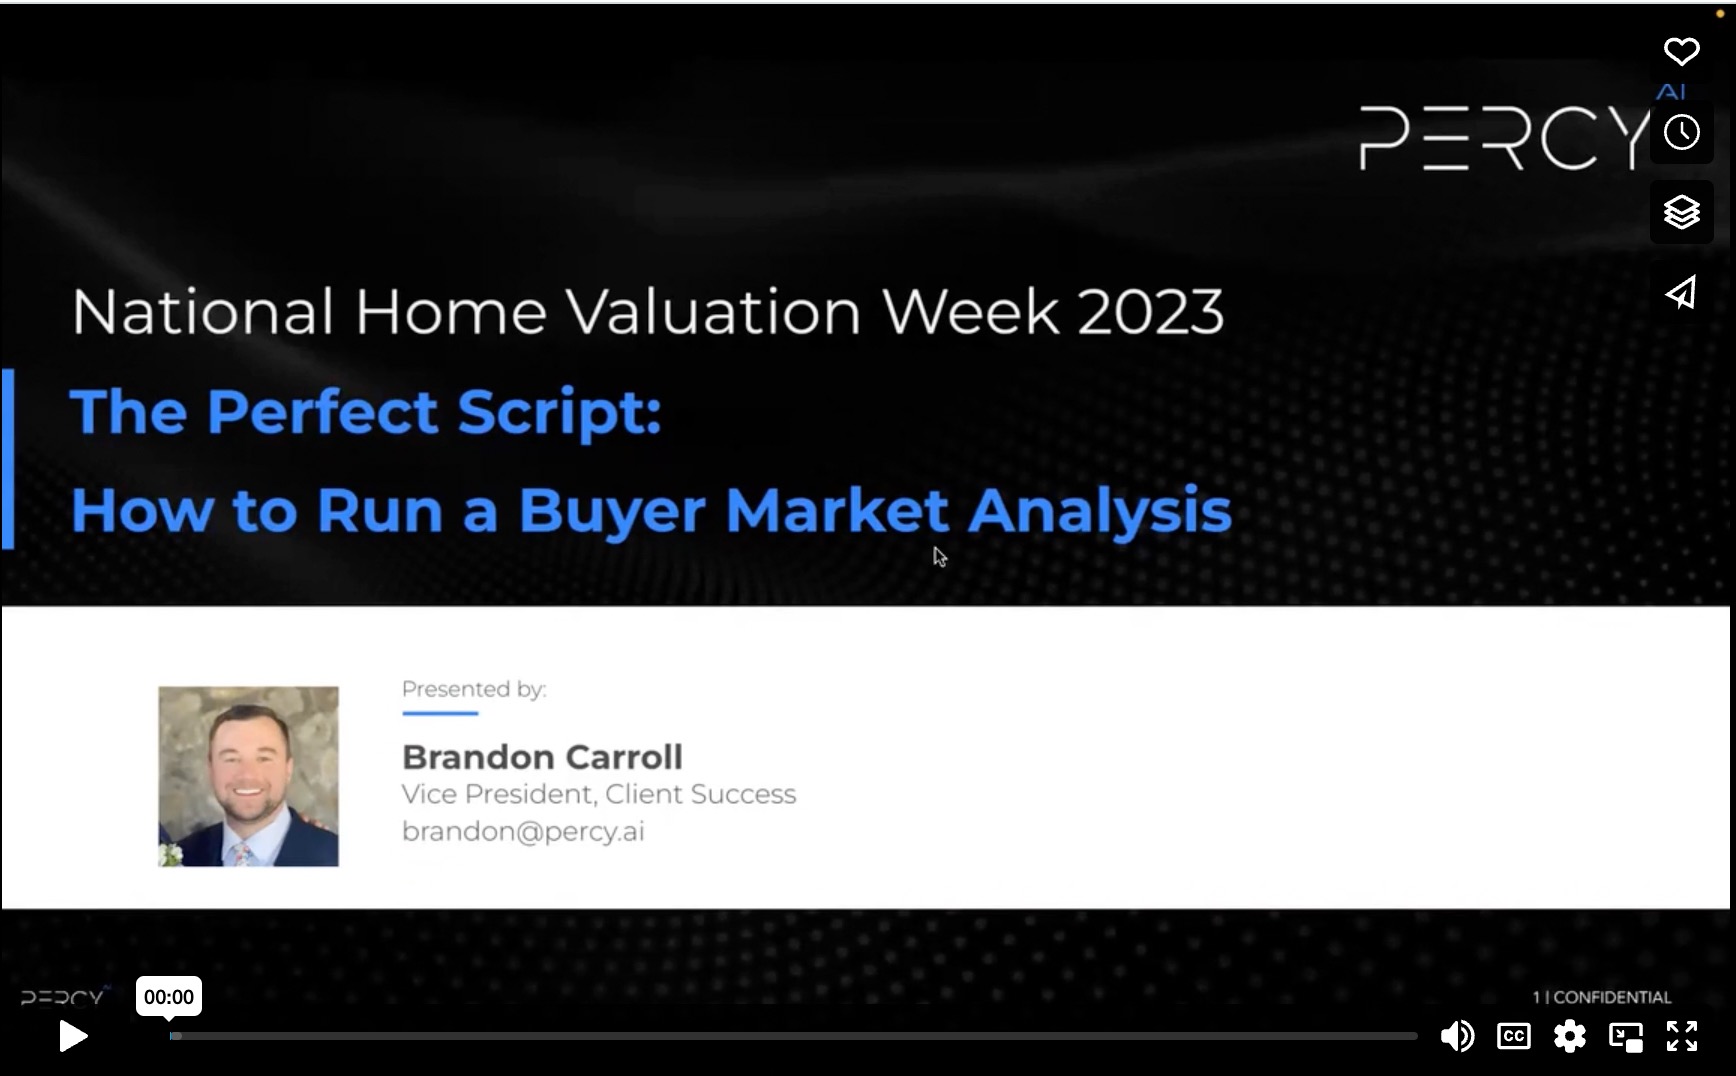 The_Perfect_Script_How_to_Run_a_Buyer_Market_Analysis_on_Vimeo_2023-04-07_at_2.17.46_PM.jpg